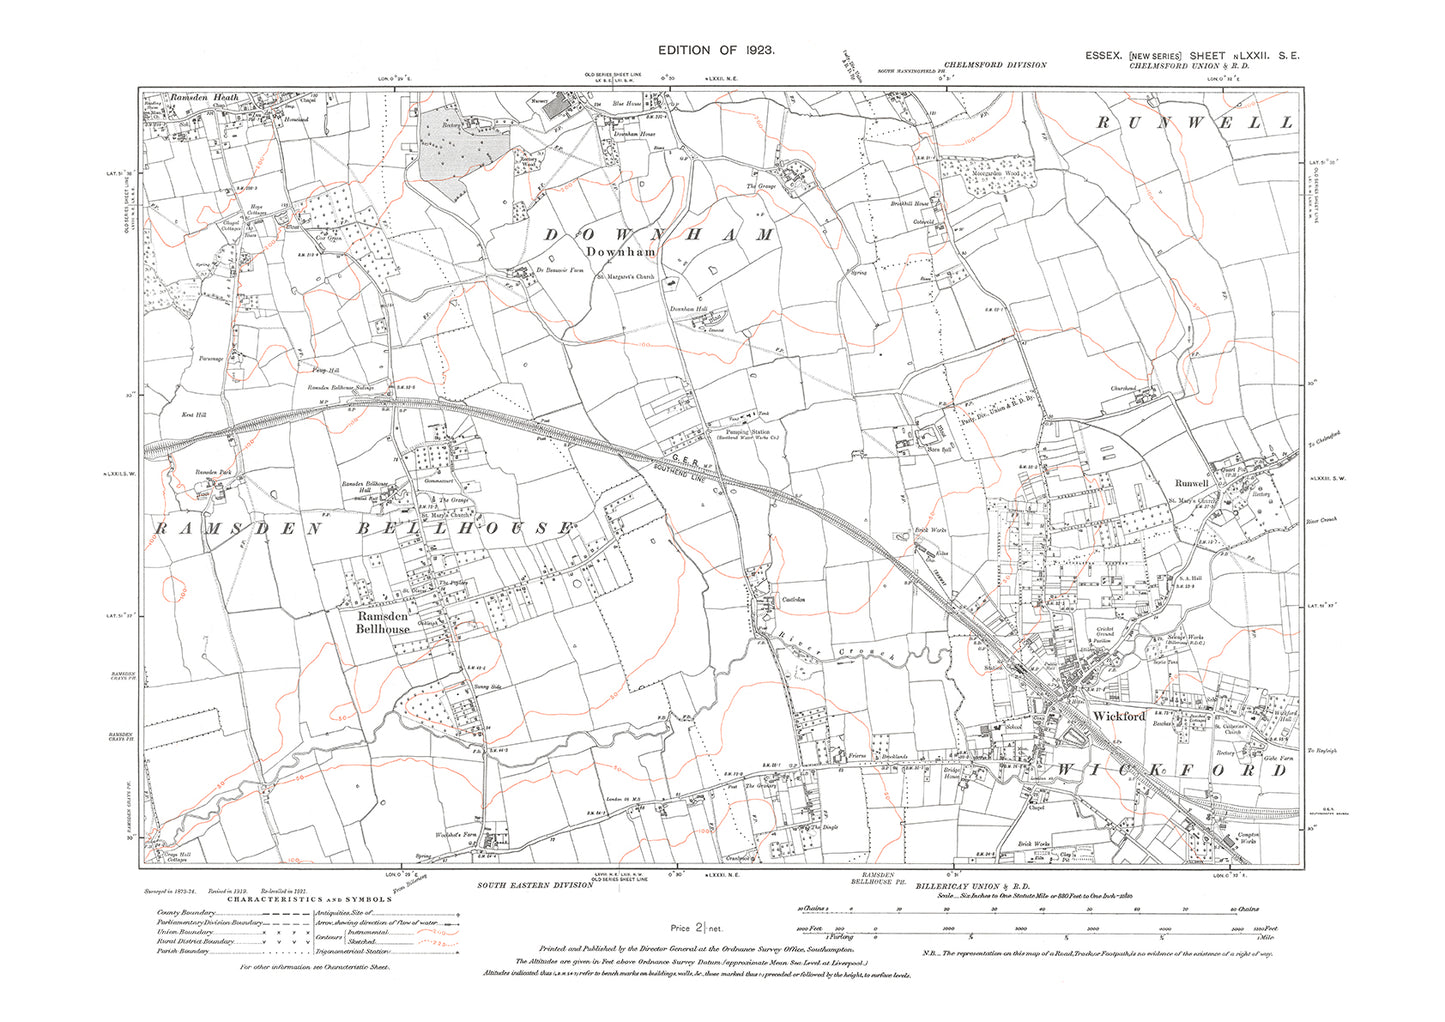 Old OS map dated 1923, showing Wickford, Ramsden Bellhouse, Runwell and Downham in Essex - 72SE